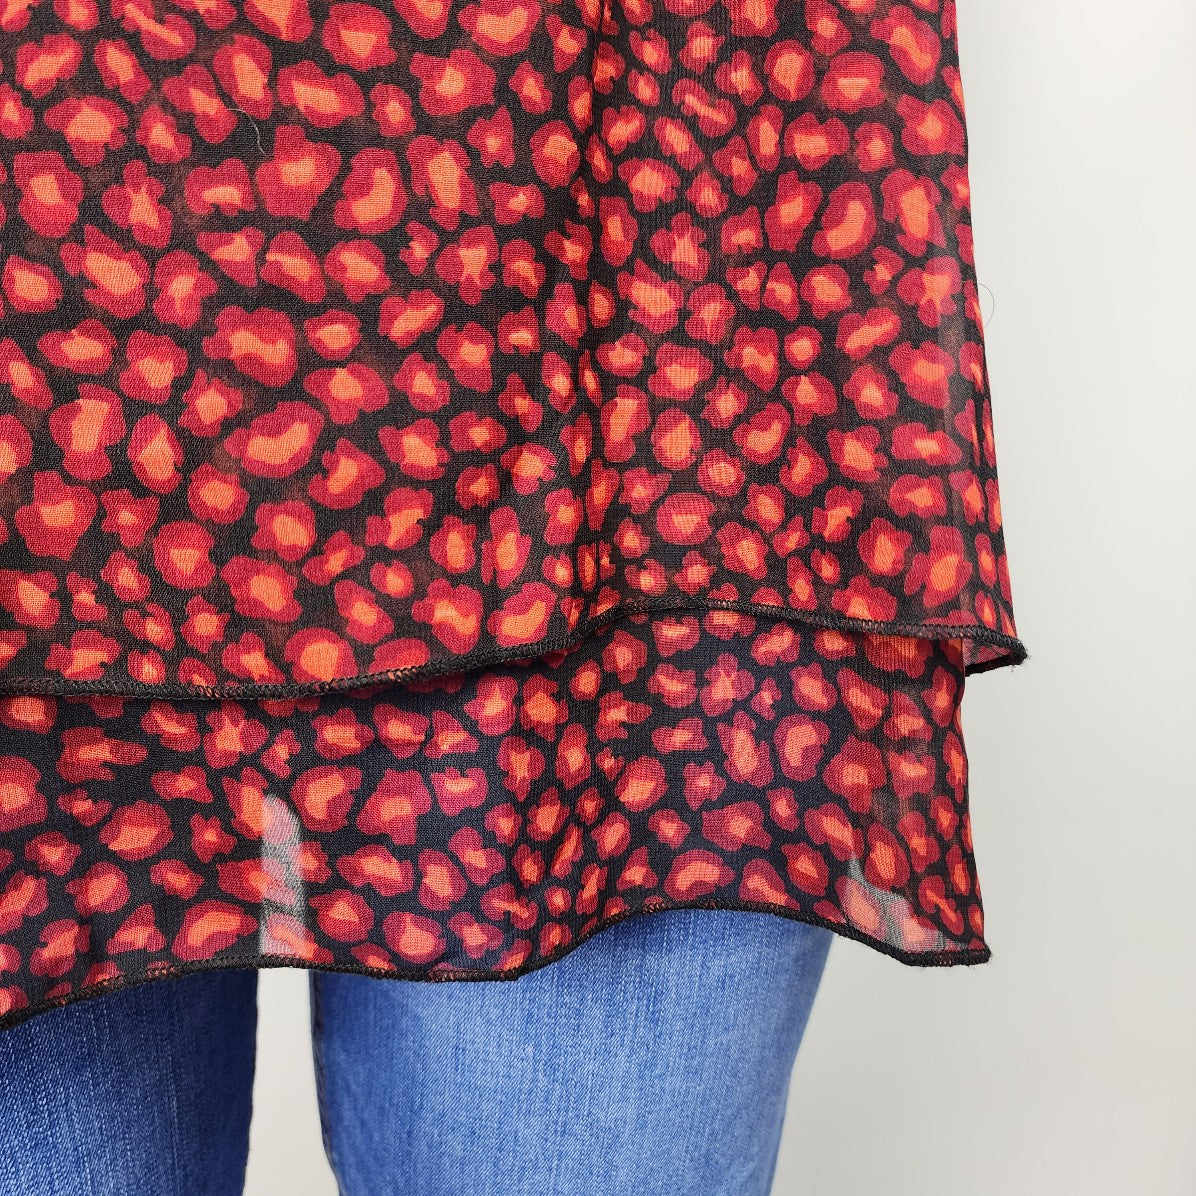 Classic Editions Red Floral Blouse Top Size XXL